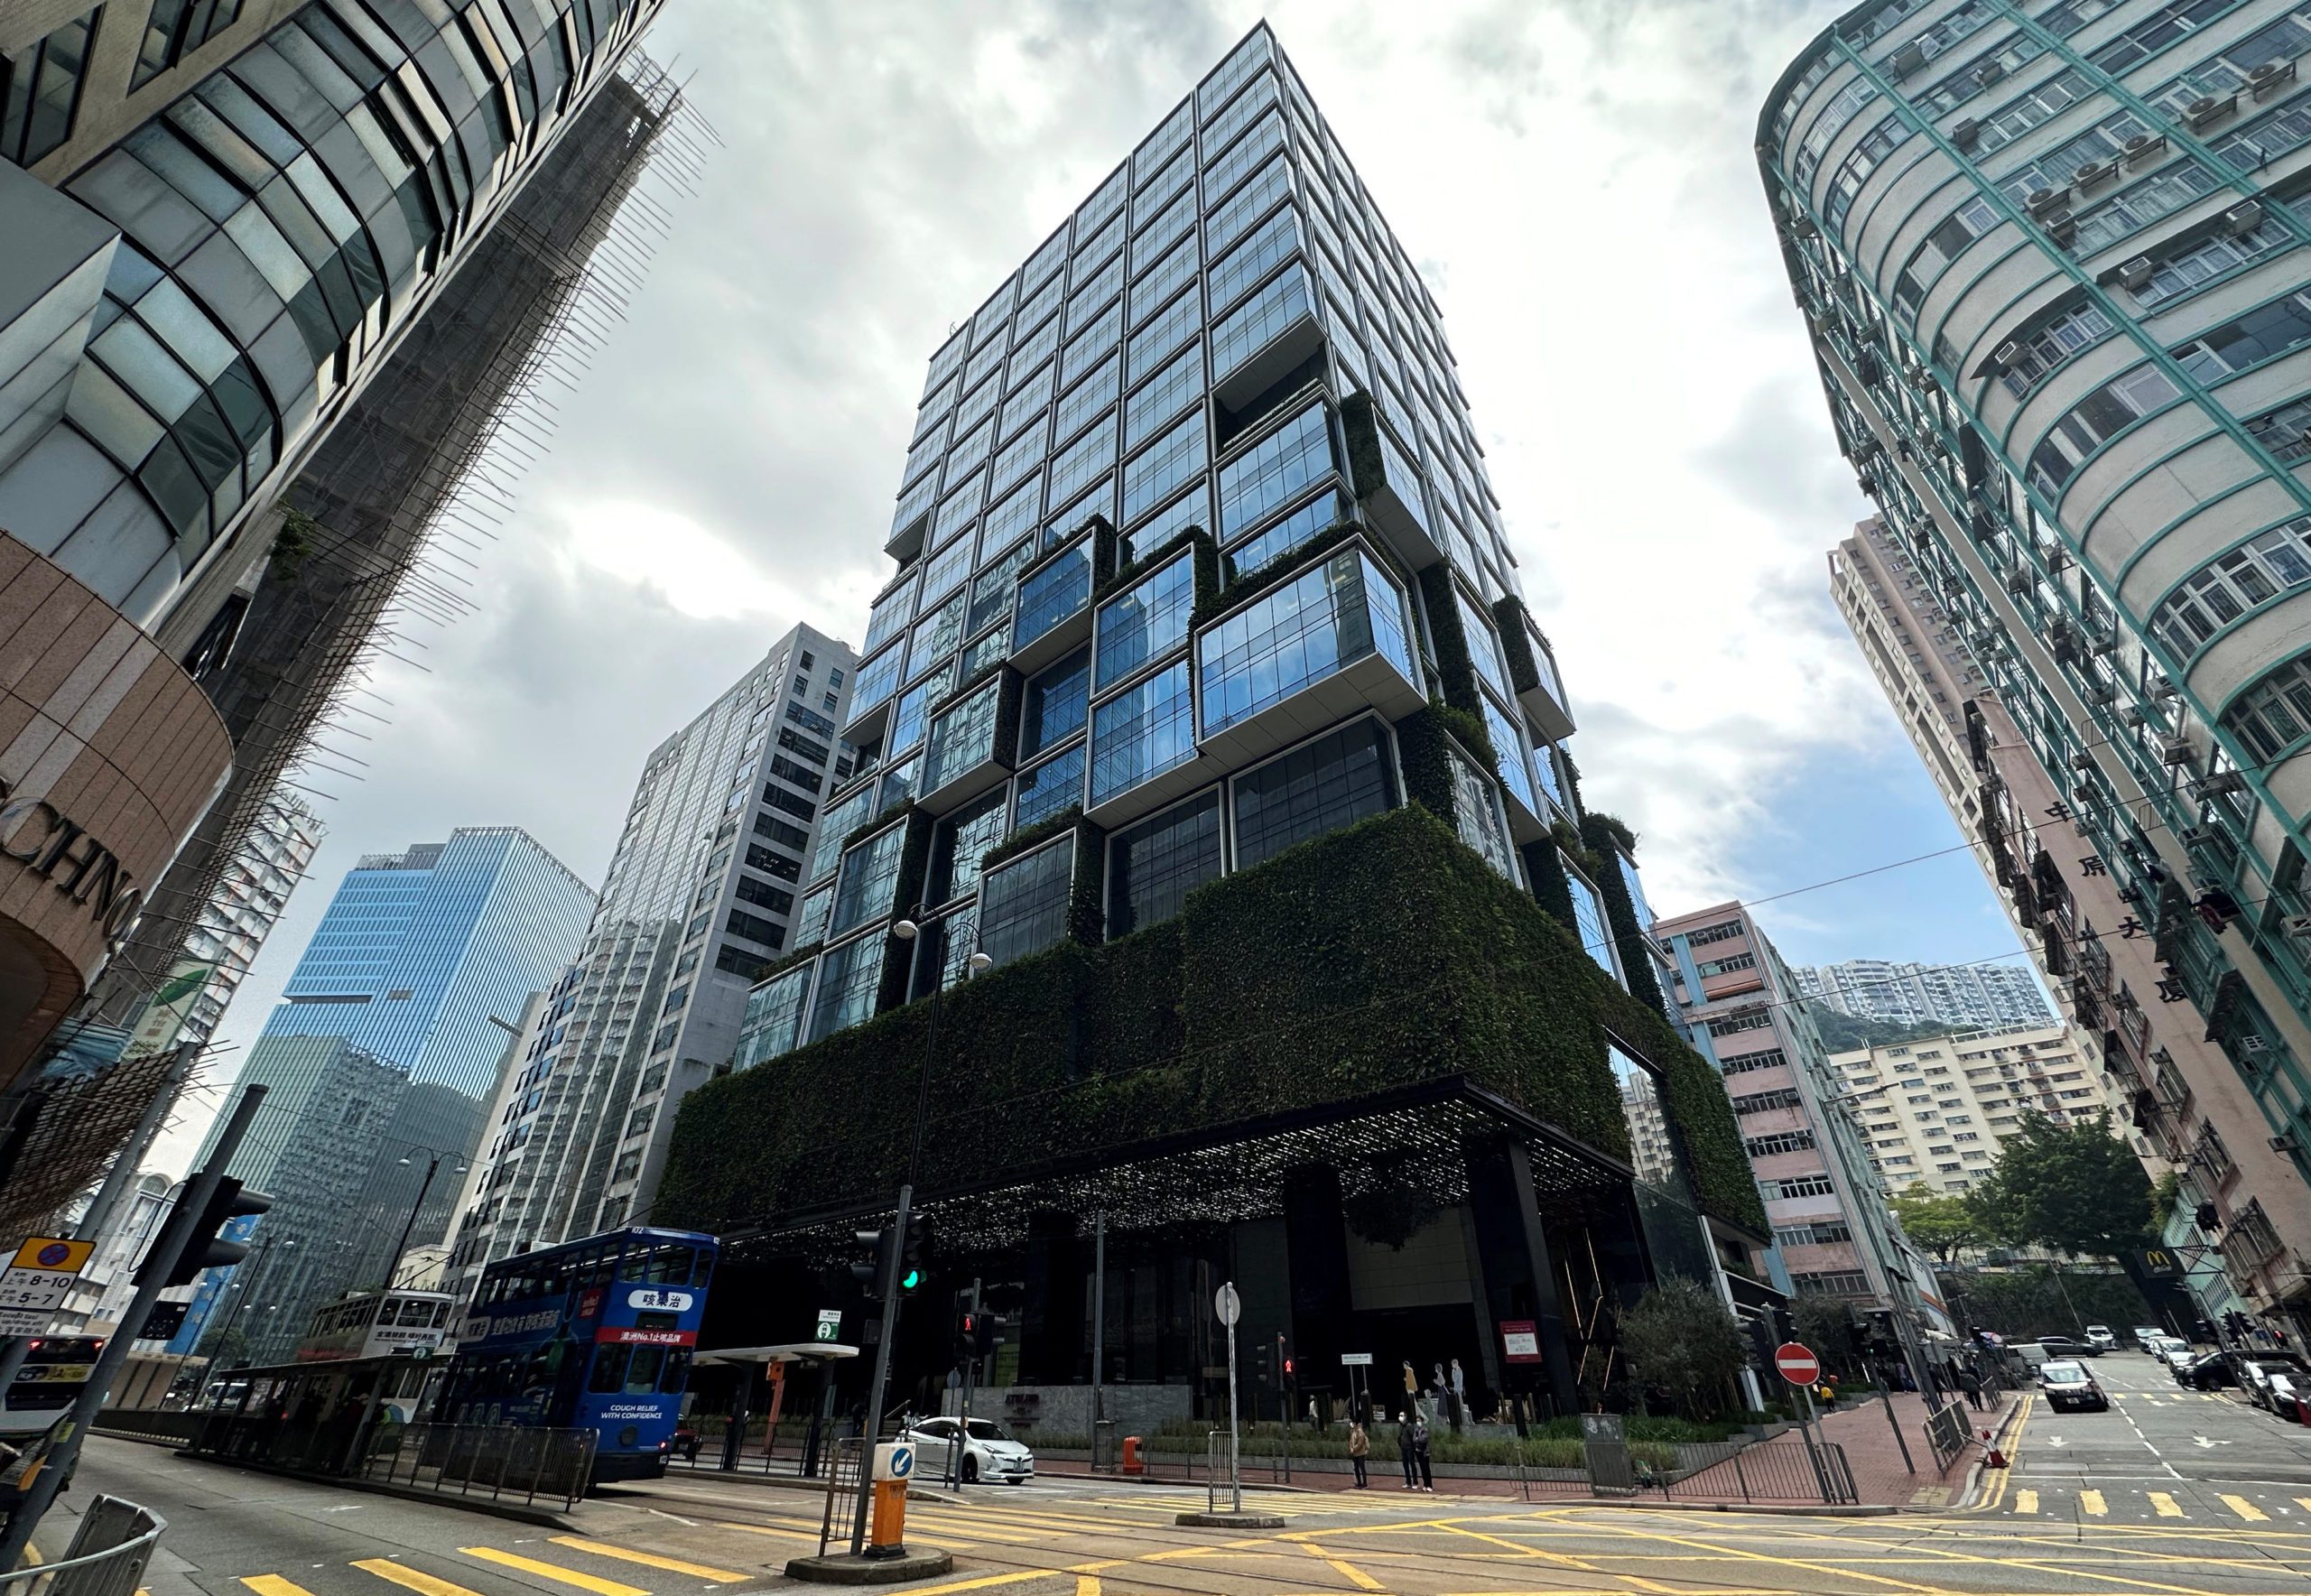 HK-based New World weighs sale of majority stake in $1.4b premium office tower